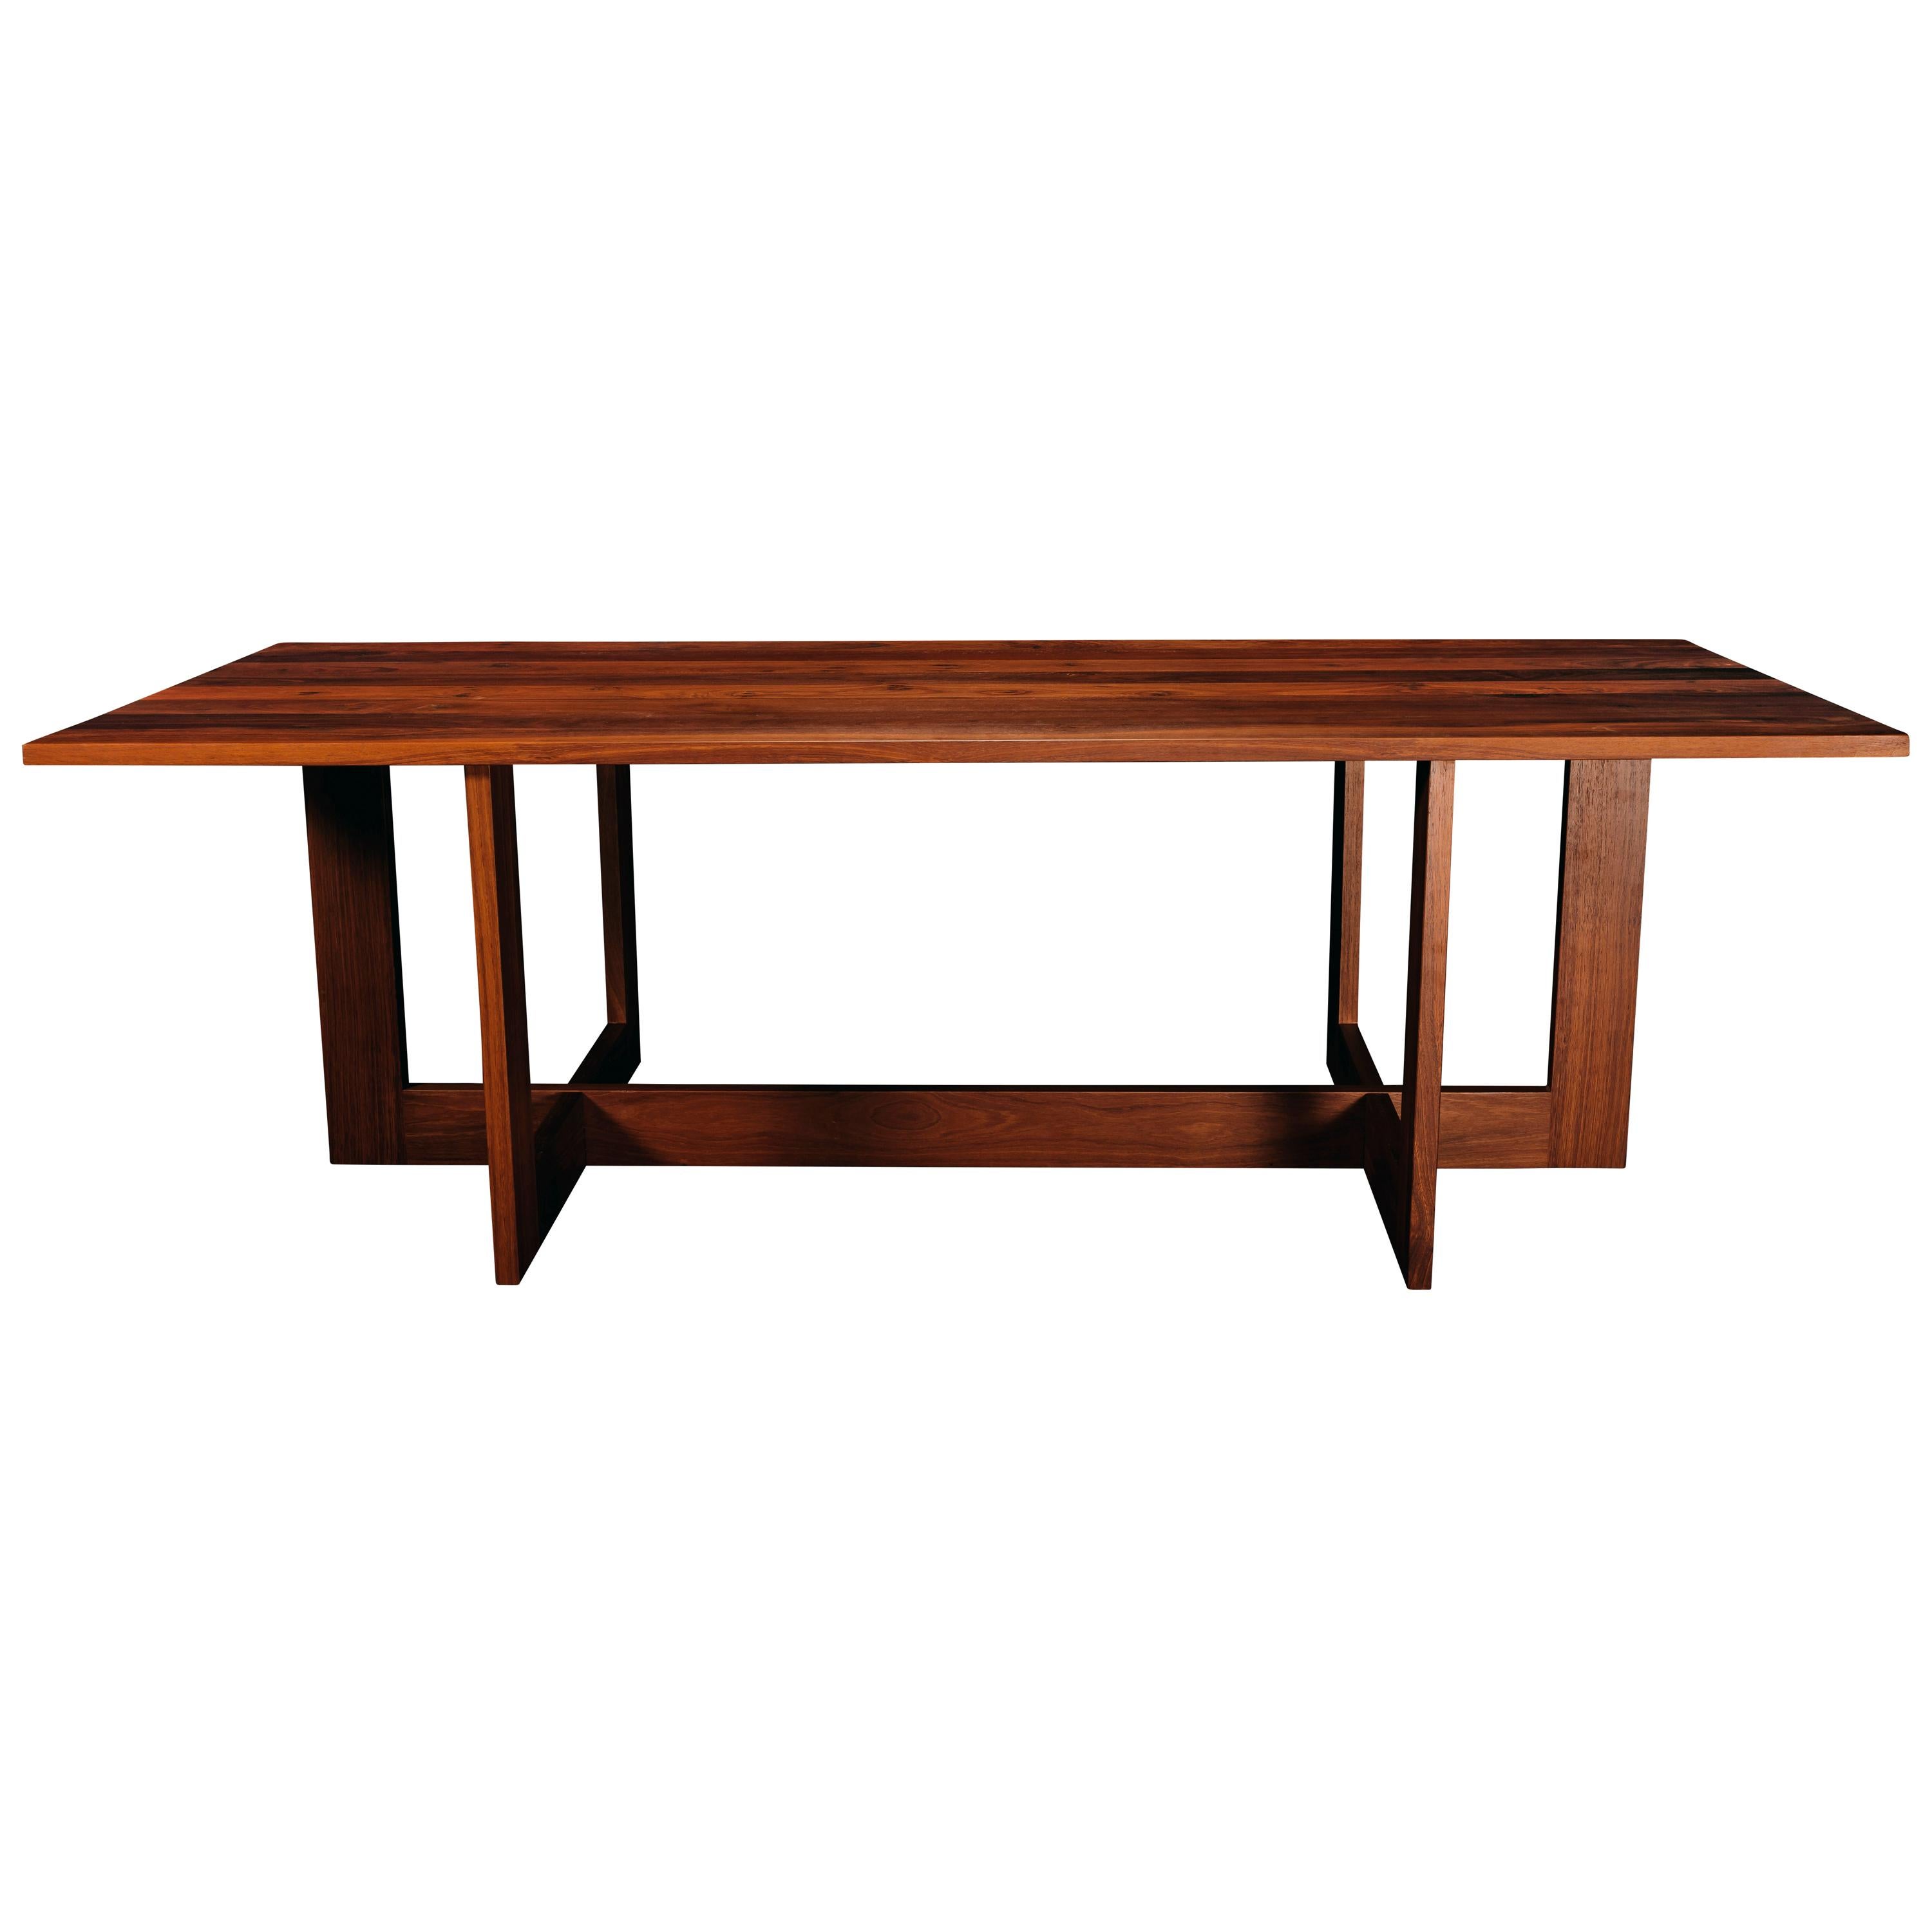 Pyrenees Dining Table, Handcrafted in Western Australian Jarrah Hardwood  For Sale at 1stDibs | jarrah wood table, jarrah tables for sale, jarrah wood  furniture for sale